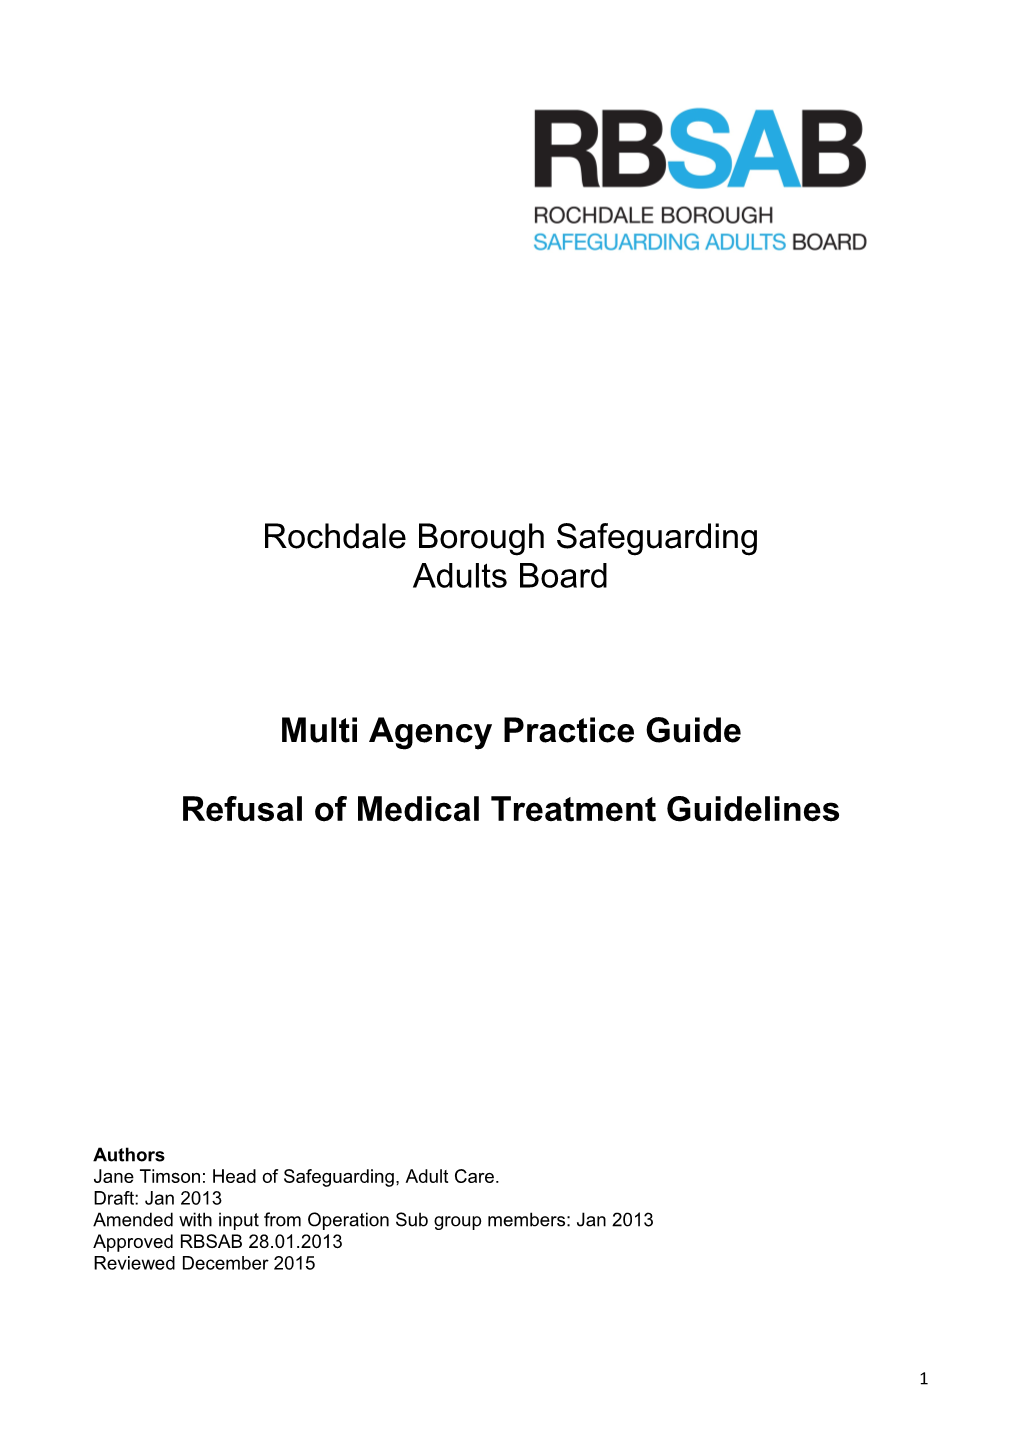 Refusal of Medical Treatment Policy/Procedure